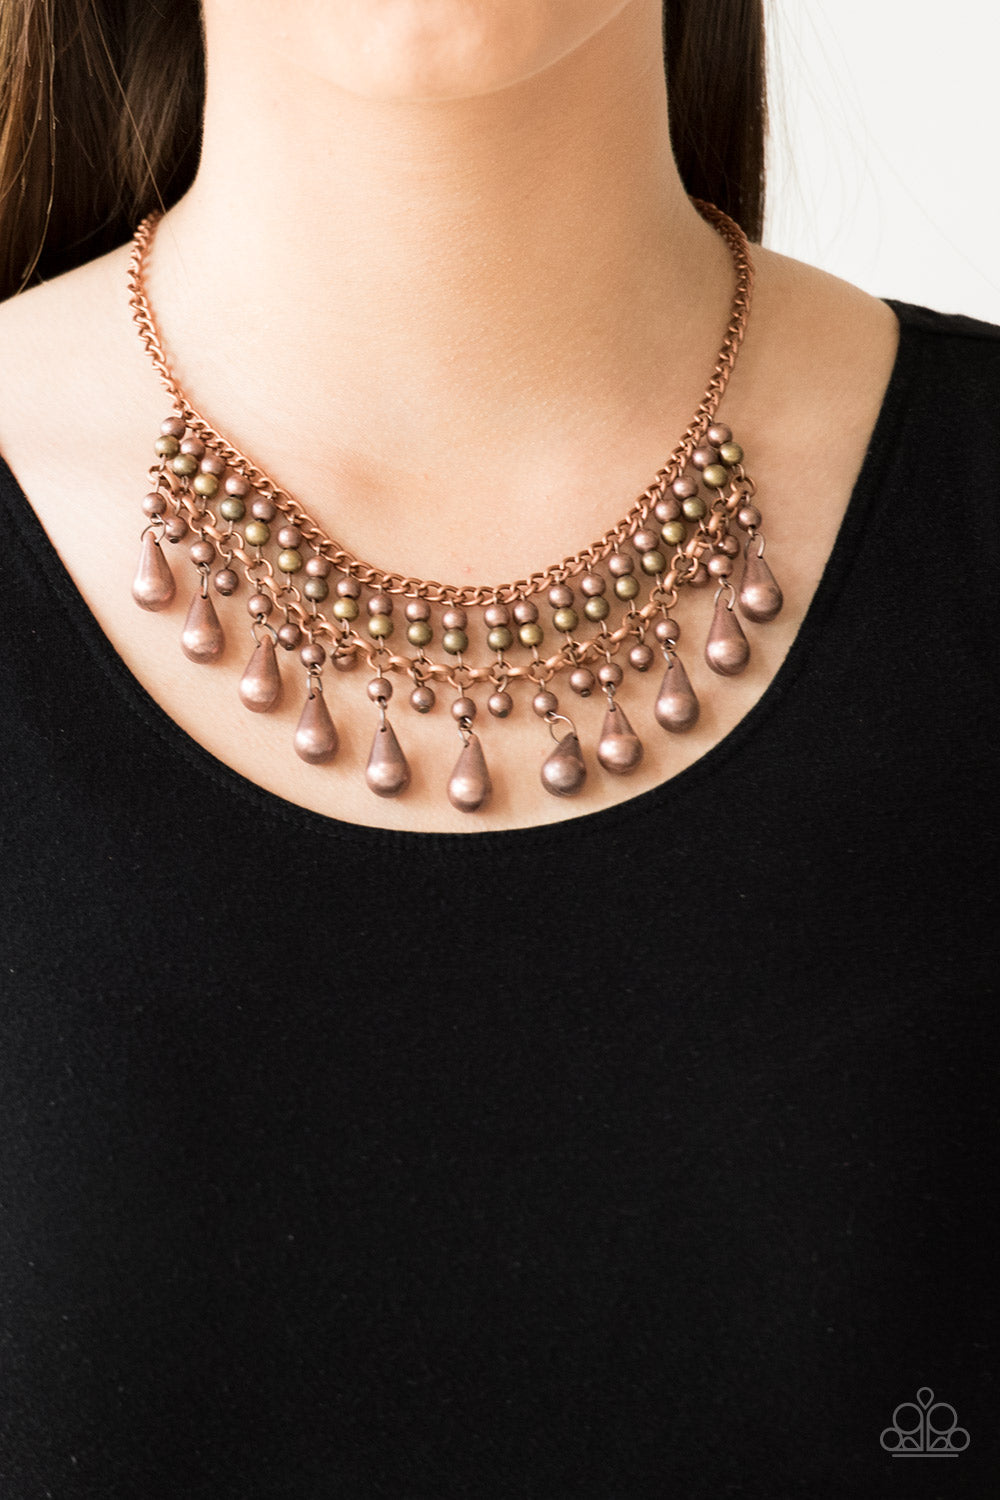 DONT FORGET TO BOSS! - COPPER NECKLACE